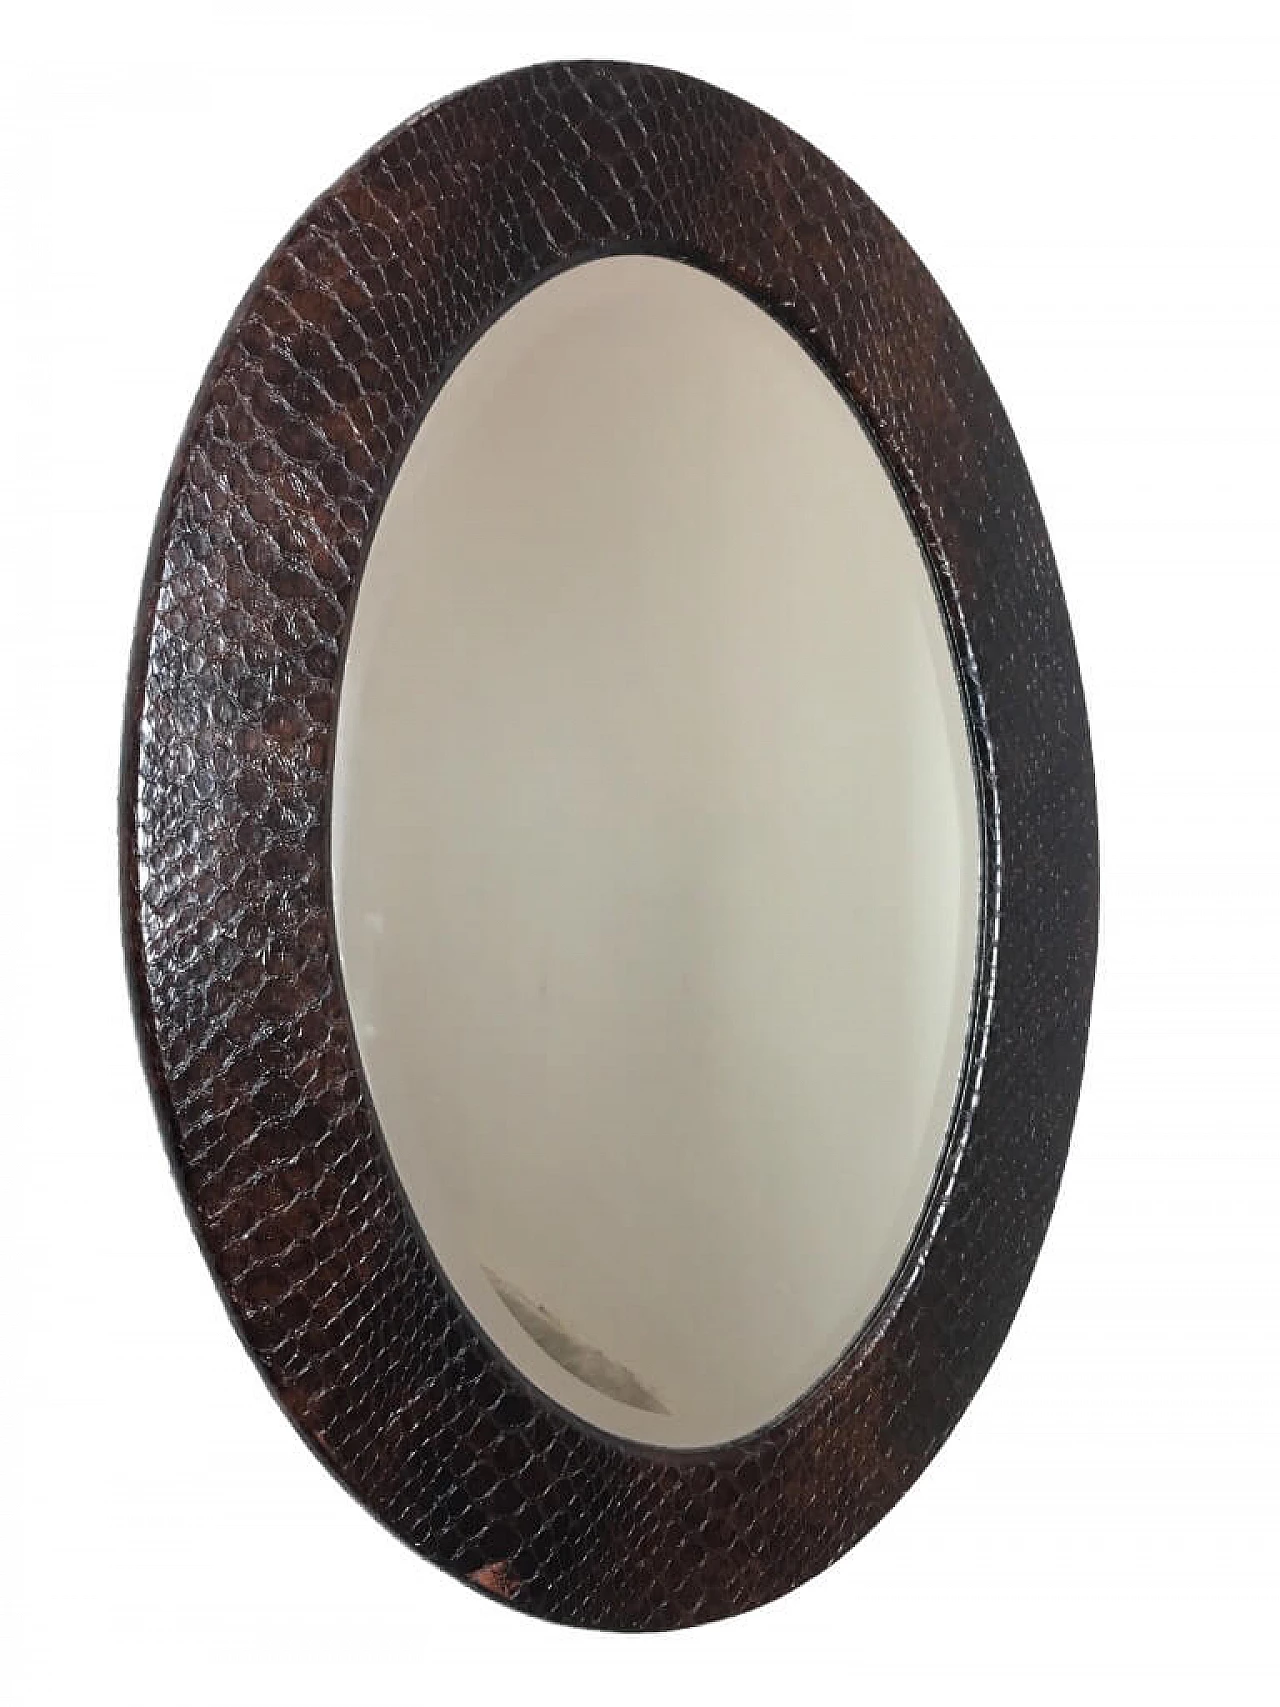 Oval mirror, 60s 1195743